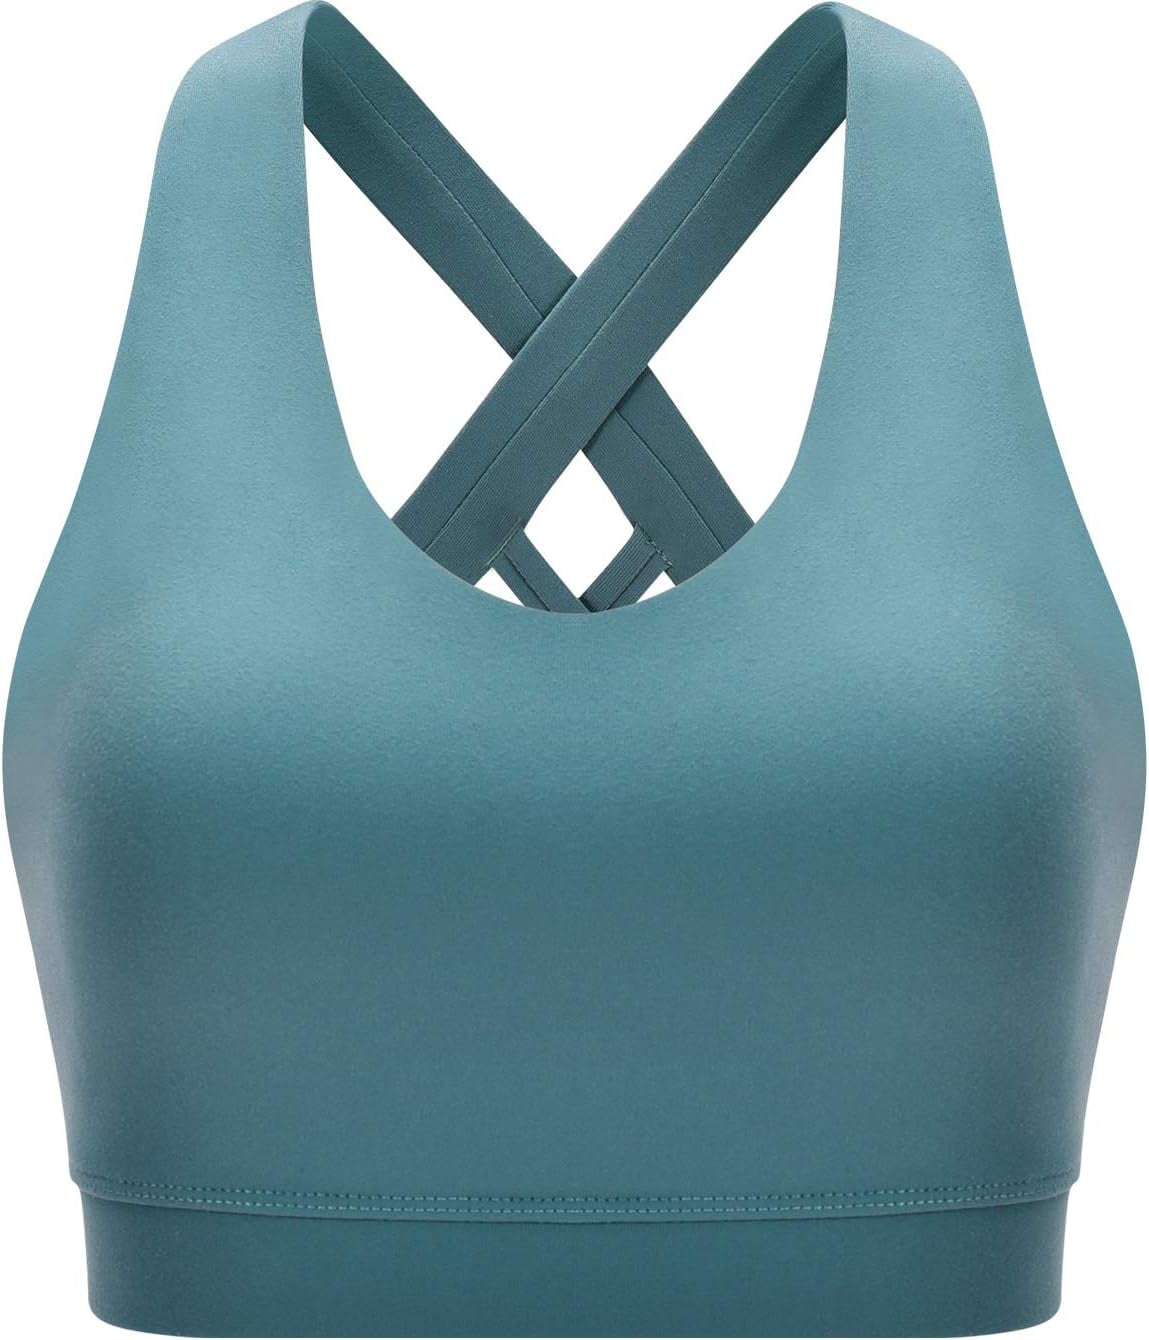 Elite Max Sports Bra (Teal) - New Dimensions Active